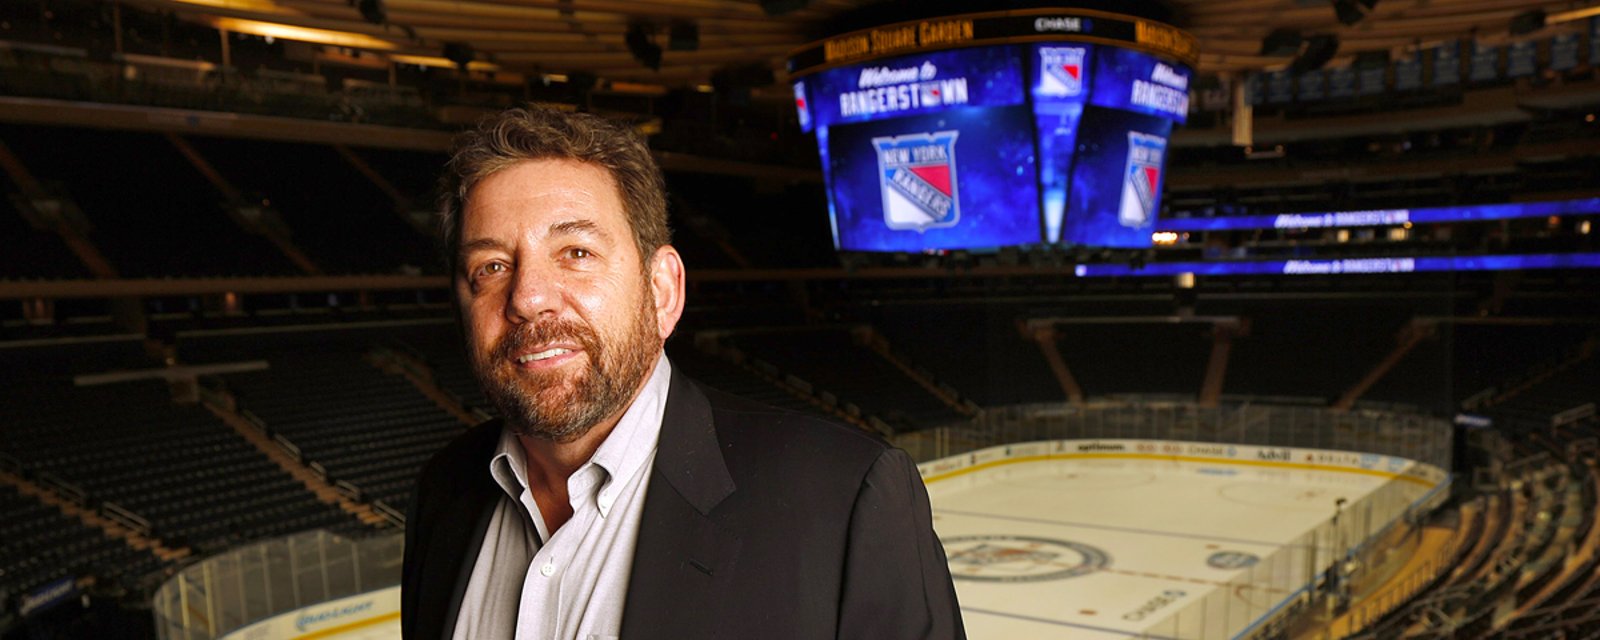 Rangers owner James Dolan sued for making too much money and for focusing on his rock band too much